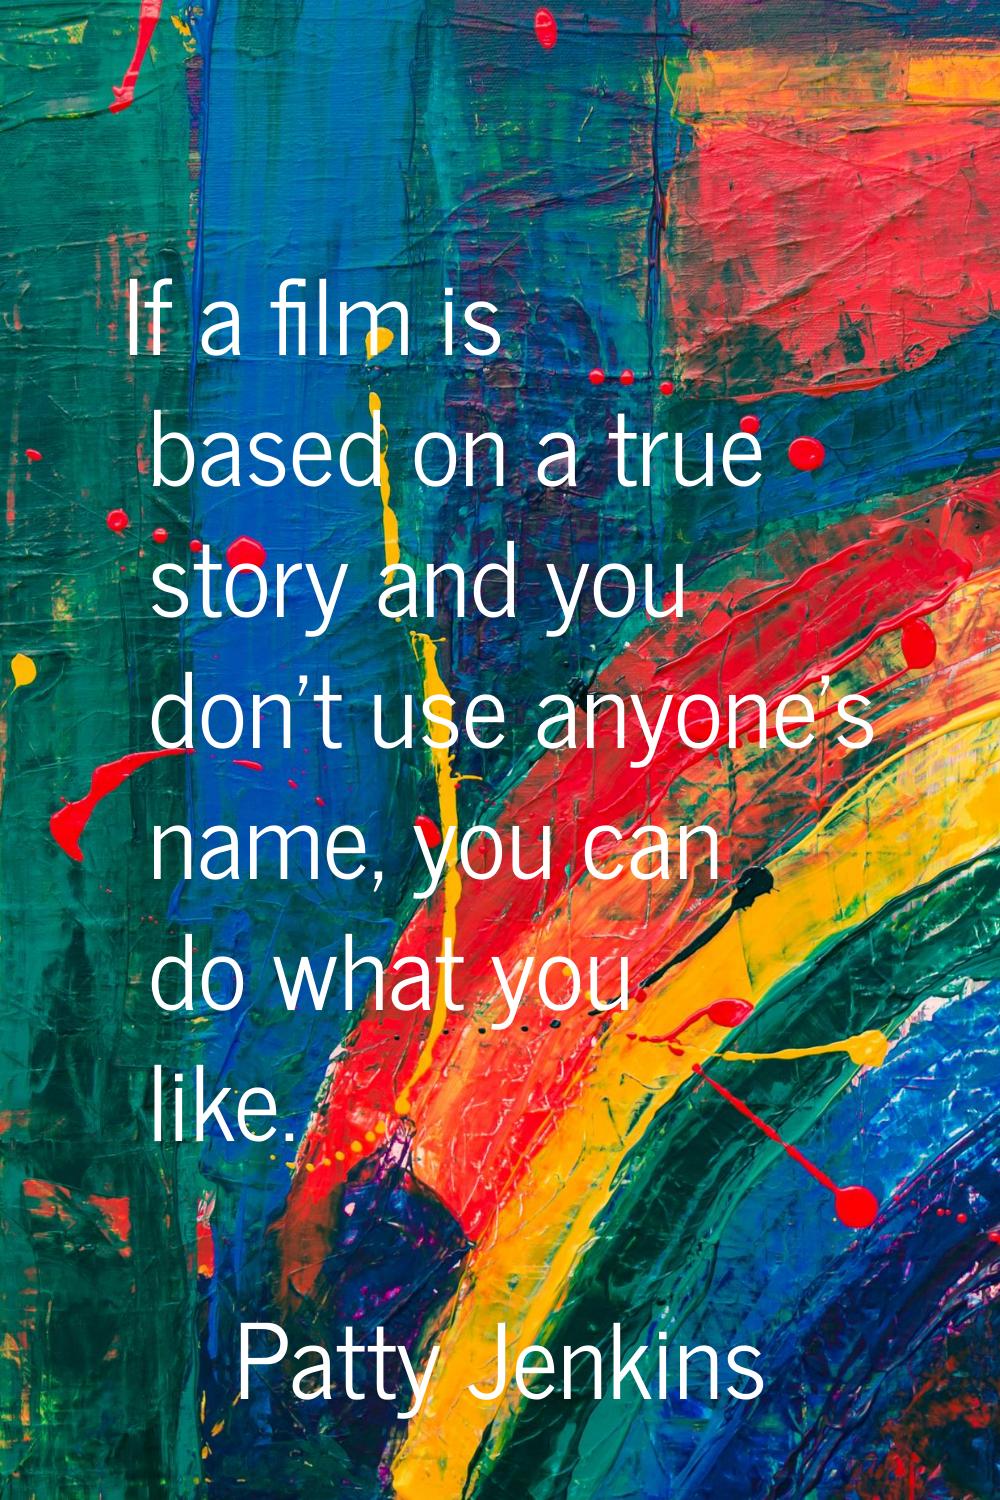 If a film is based on a true story and you don't use anyone's name, you can do what you like.